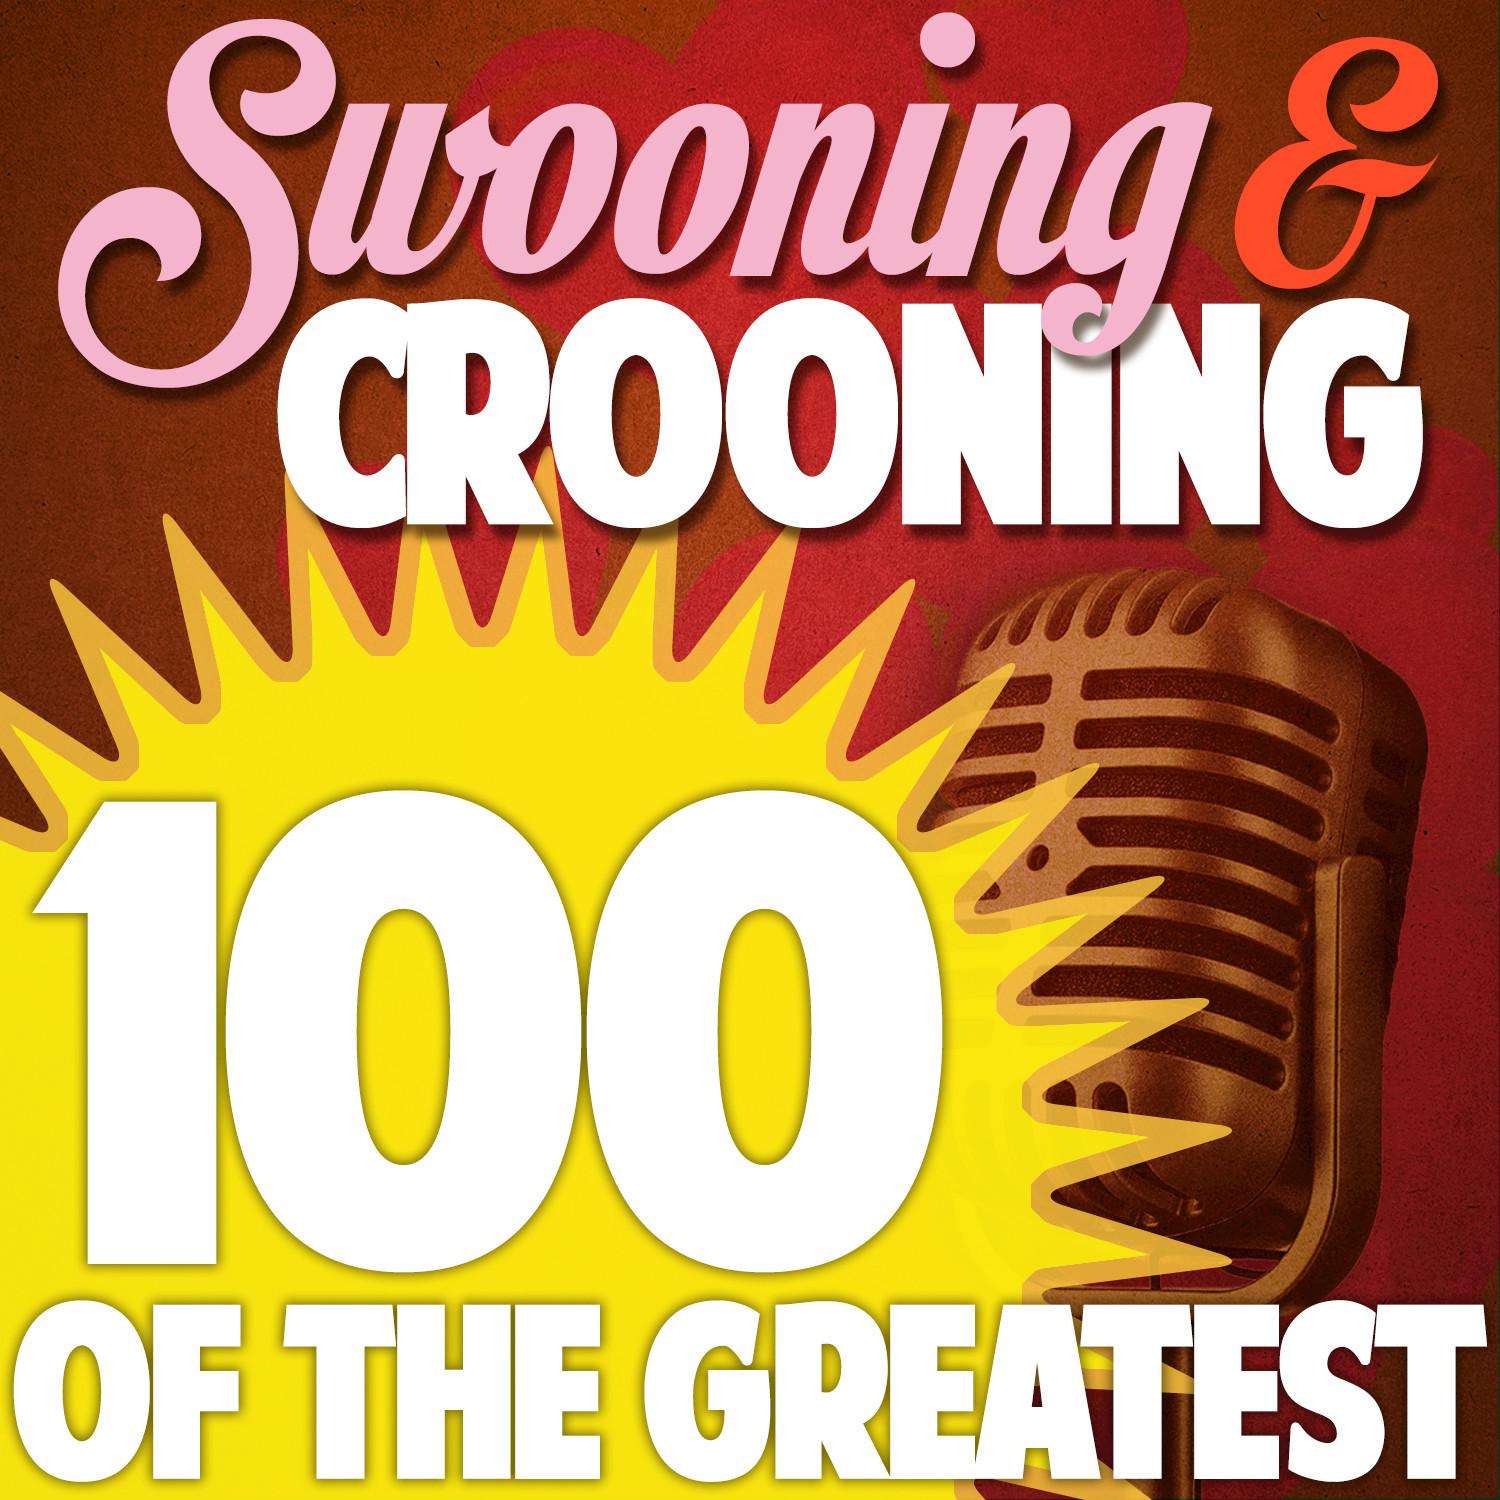 Swooning and Crooning - 100 of the Greatest